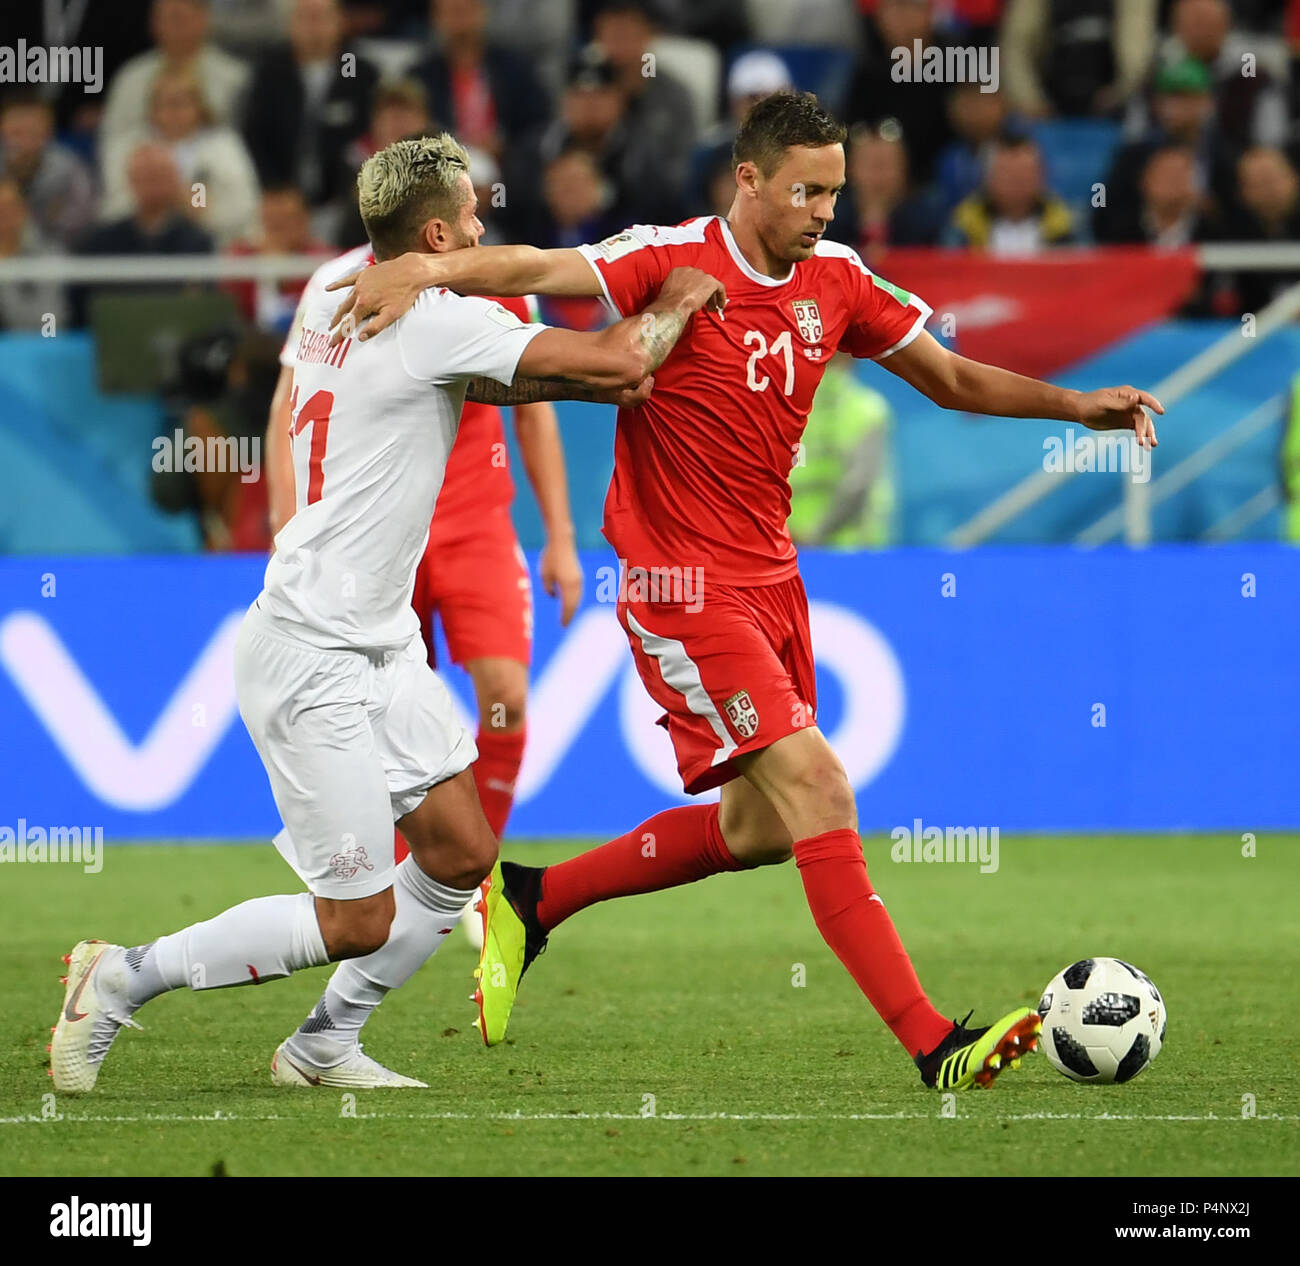 Kaliningrad, Russia. 22nd June, 2018. Nemanja Matic (R) of Serbia competes during the 2018 FIFA World Cup Group E match between Switzerland and Serbia in Kaliningrad, Russia, June 22, 2018. Credit: Chen Cheng/Xinhua/Alamy Live News Stock Photo